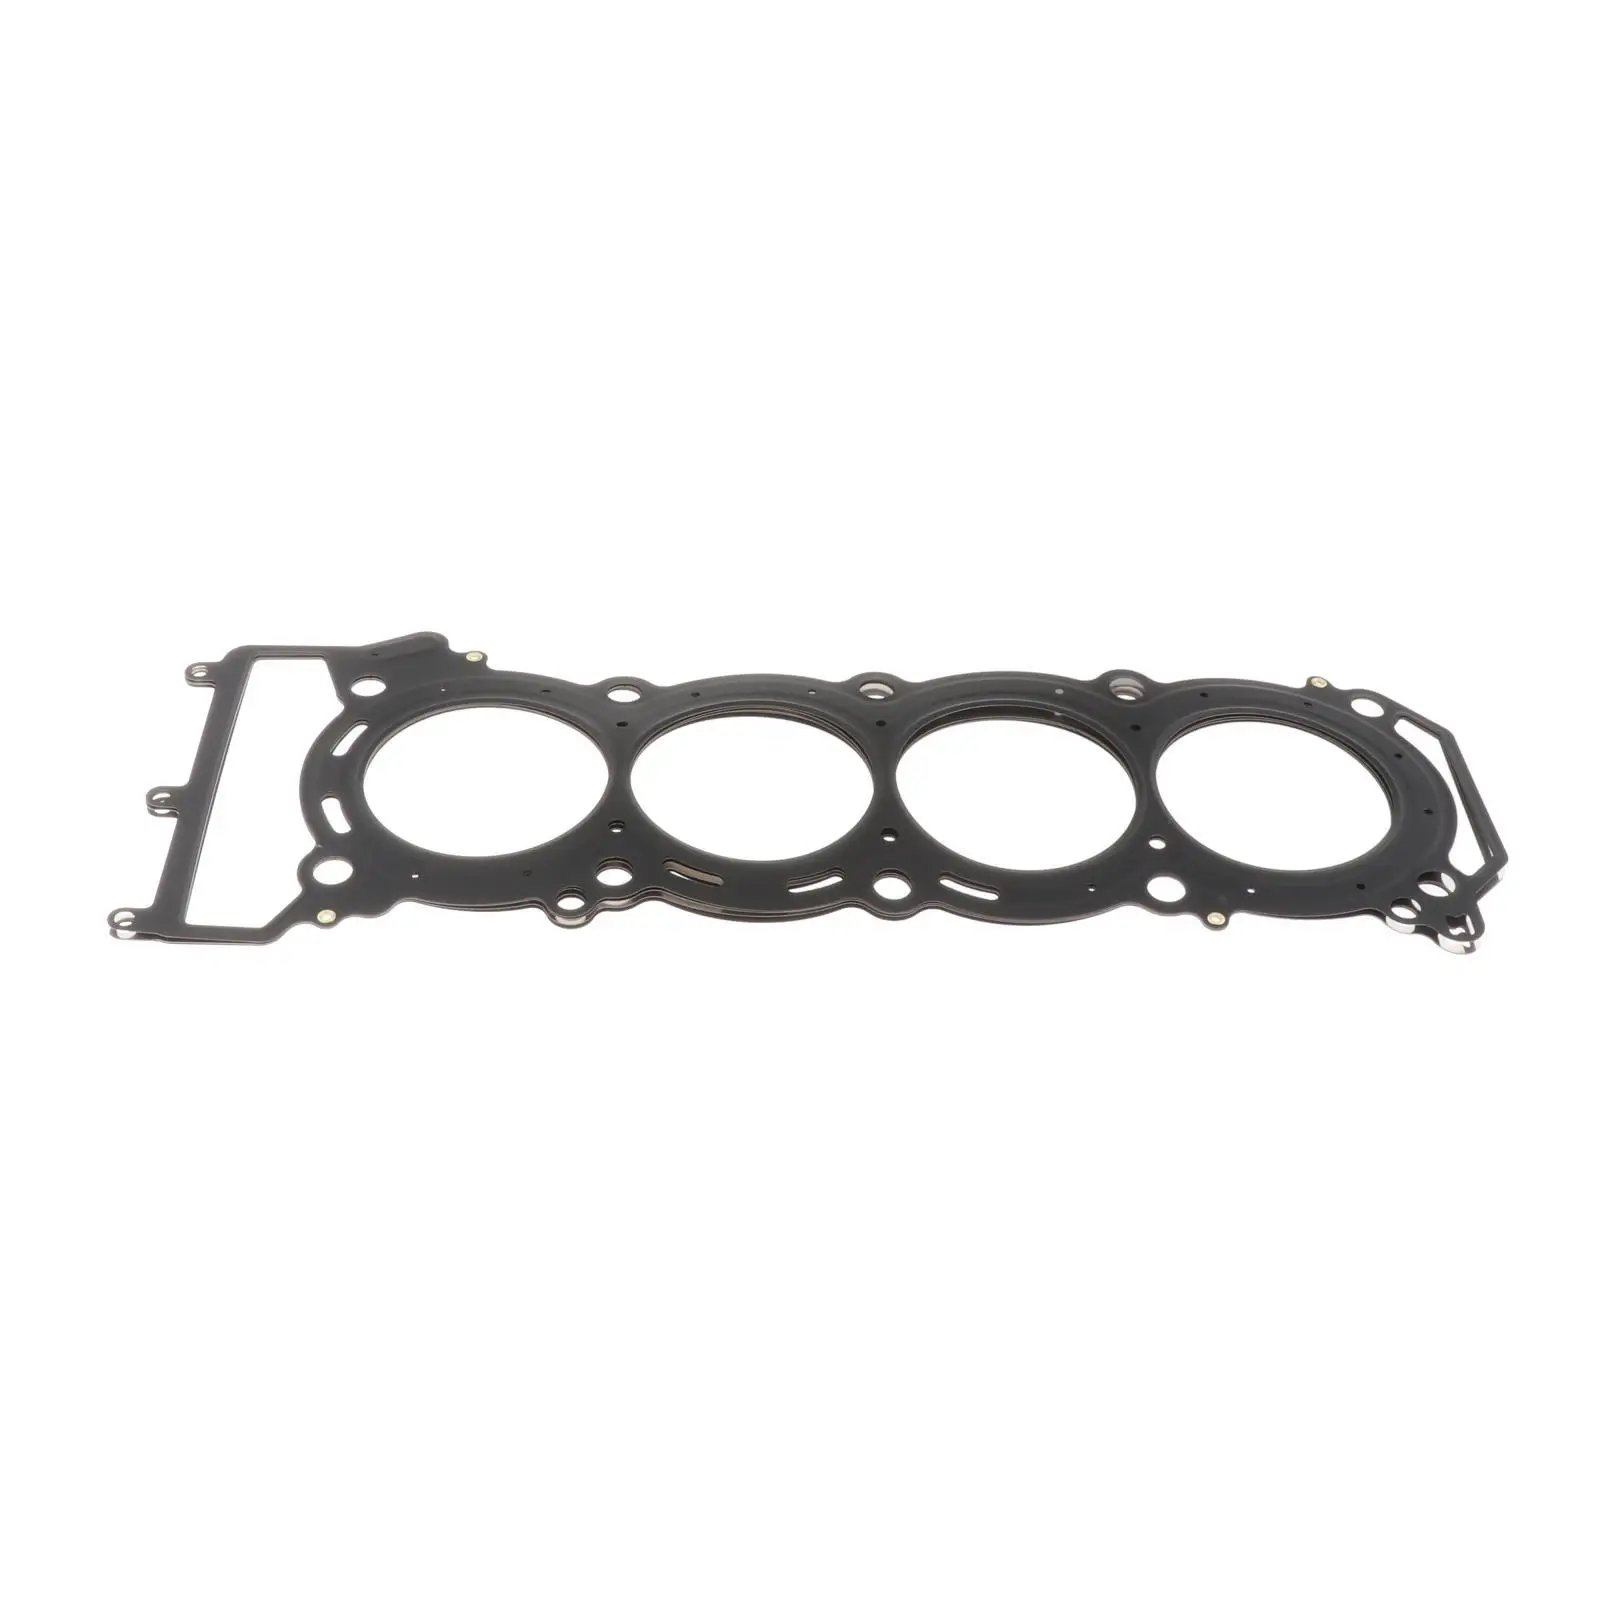 Cylinder Head Gasket for  FX SHO (1.8L) 2013 6BH-11181-00-00 Spare Parts